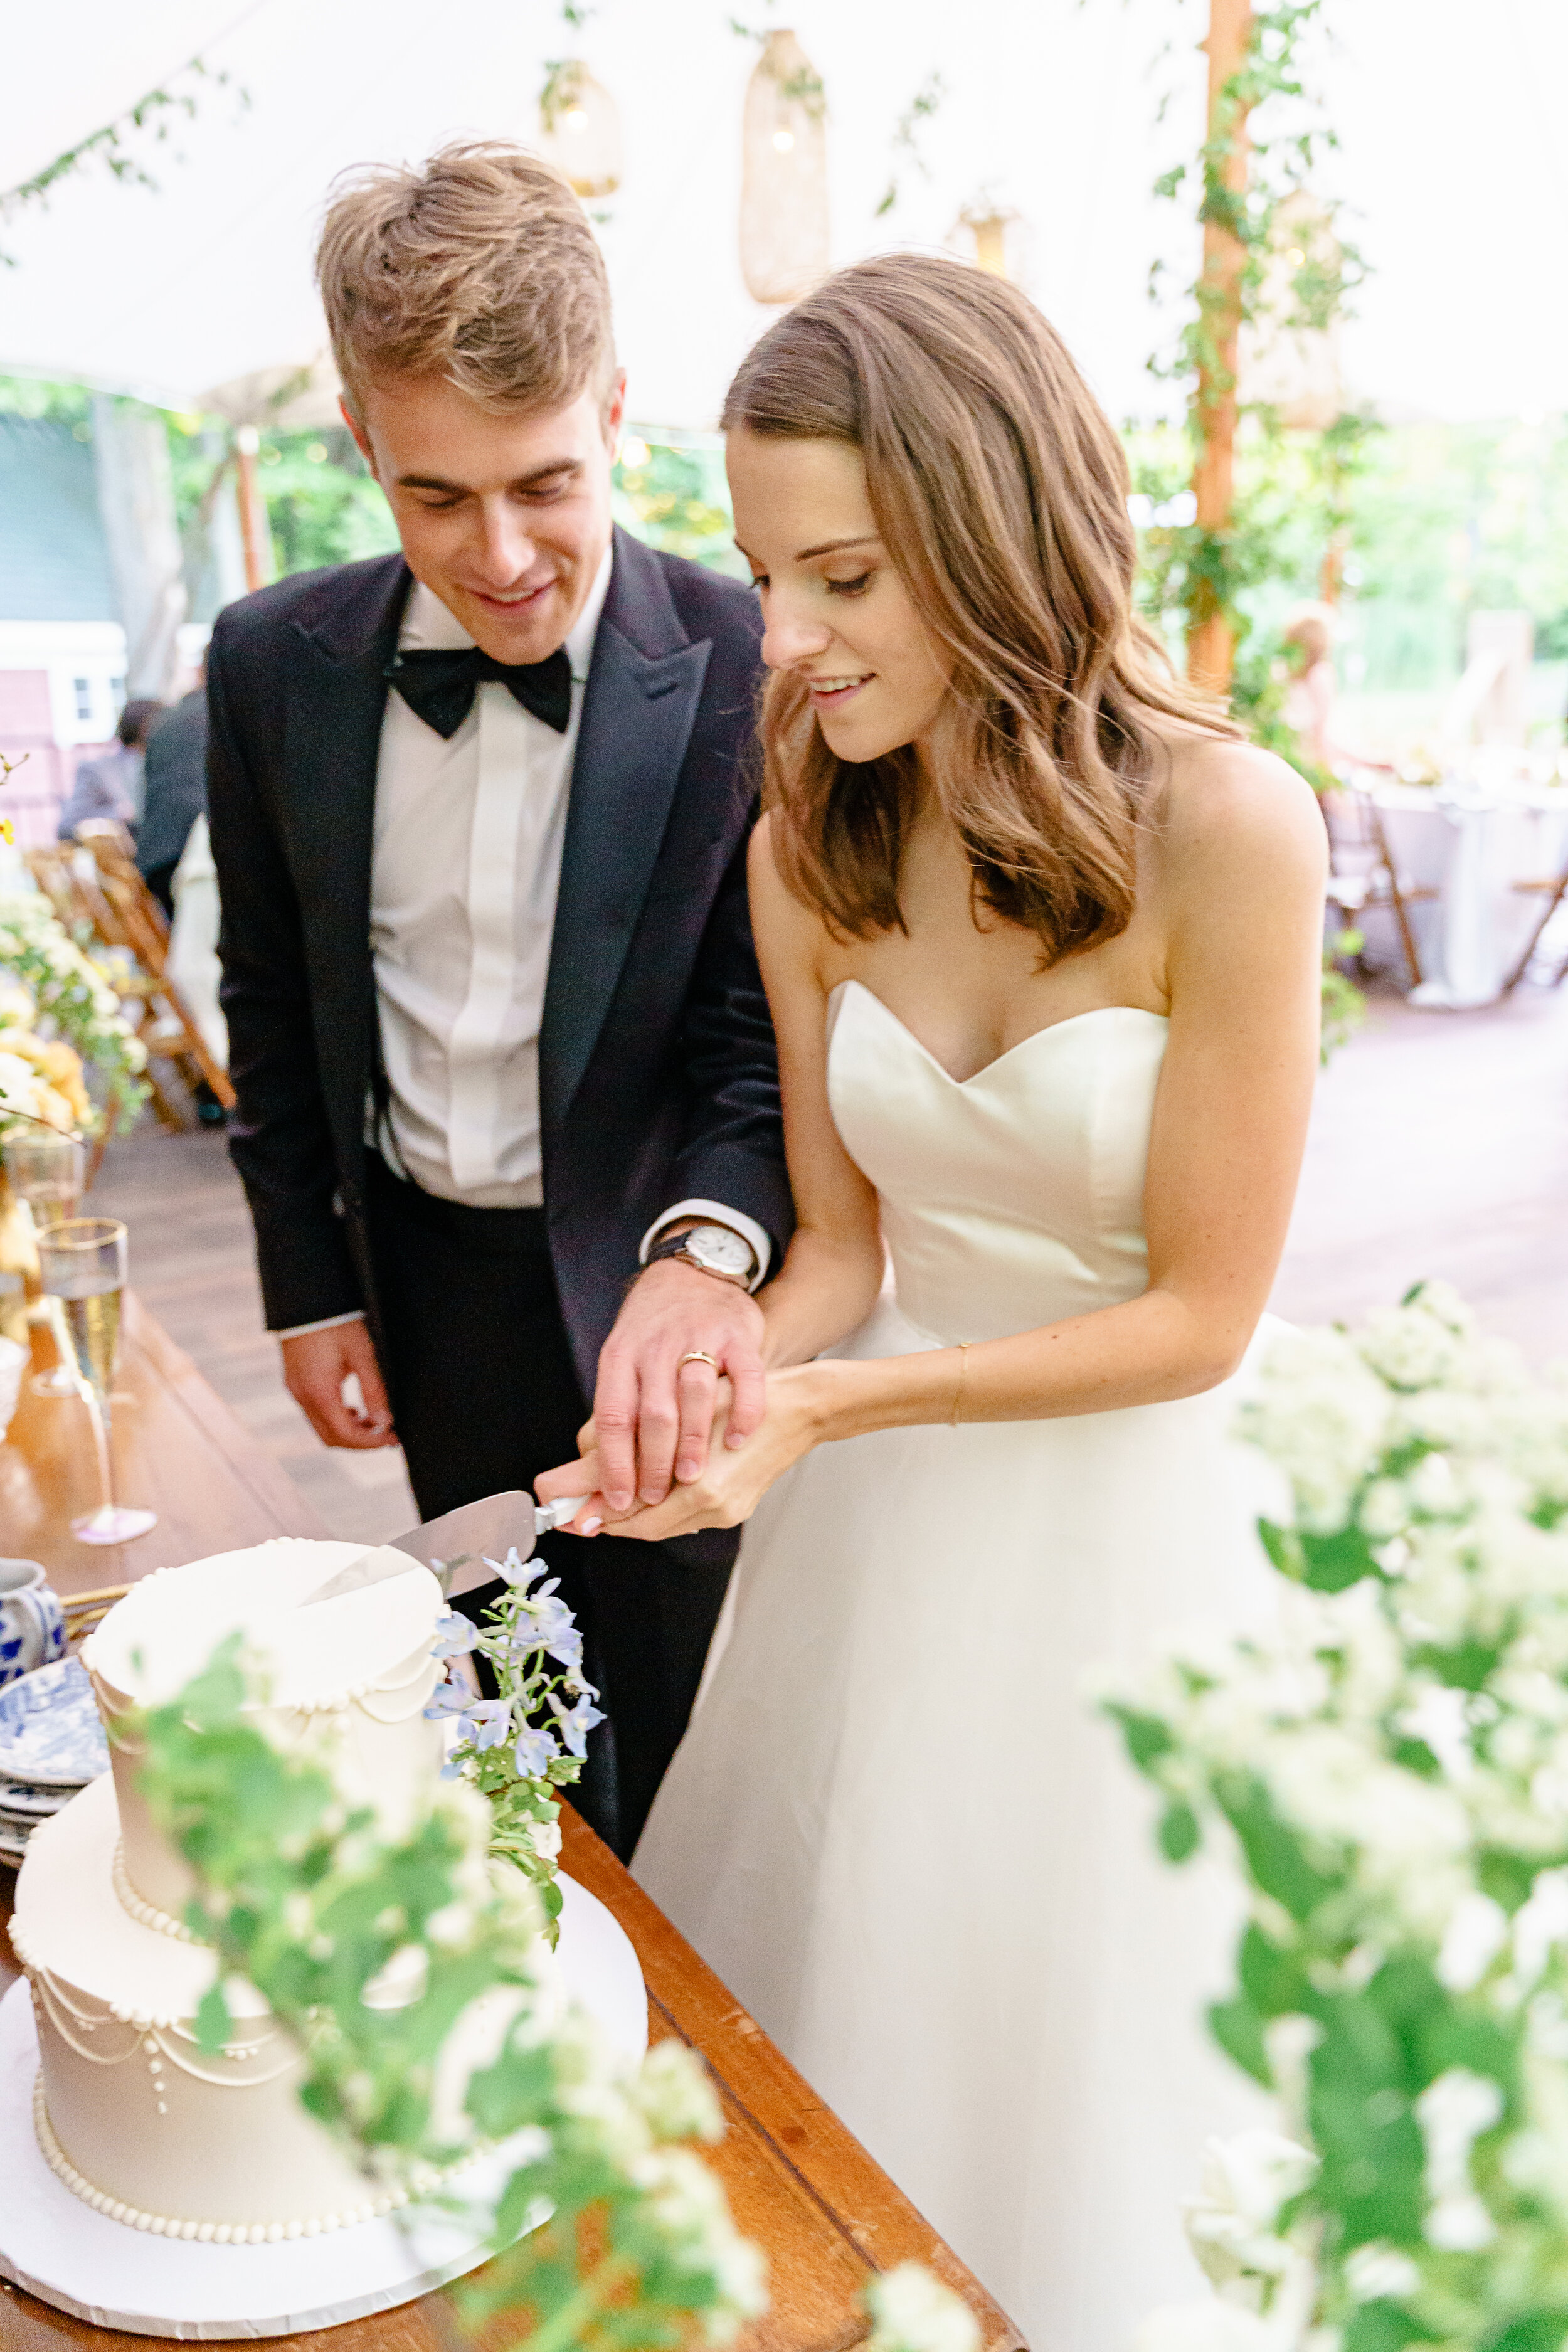 Elegant newly weds cutting the cake at their timeless outdoor summer wedding reception